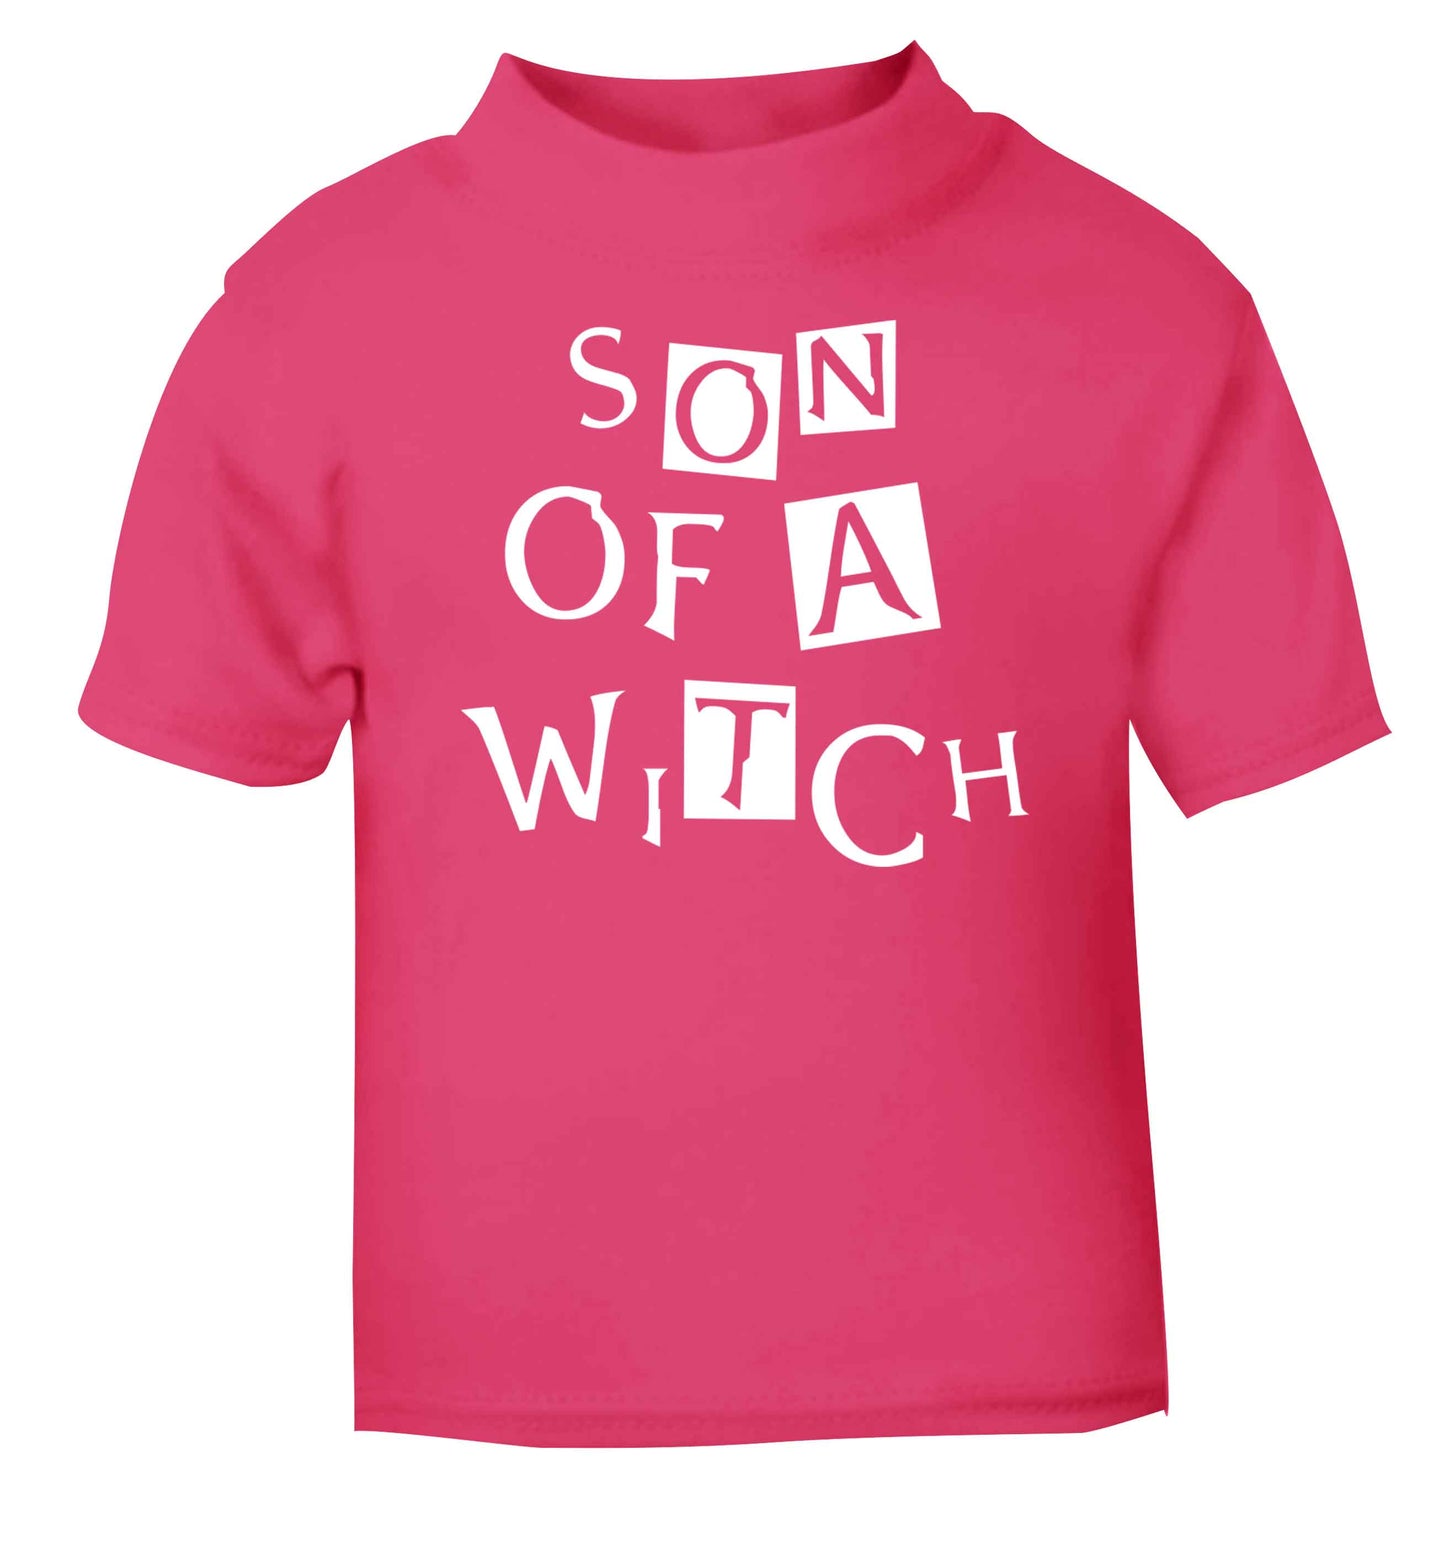 Son of a witch pink baby toddler Tshirt 2 Years